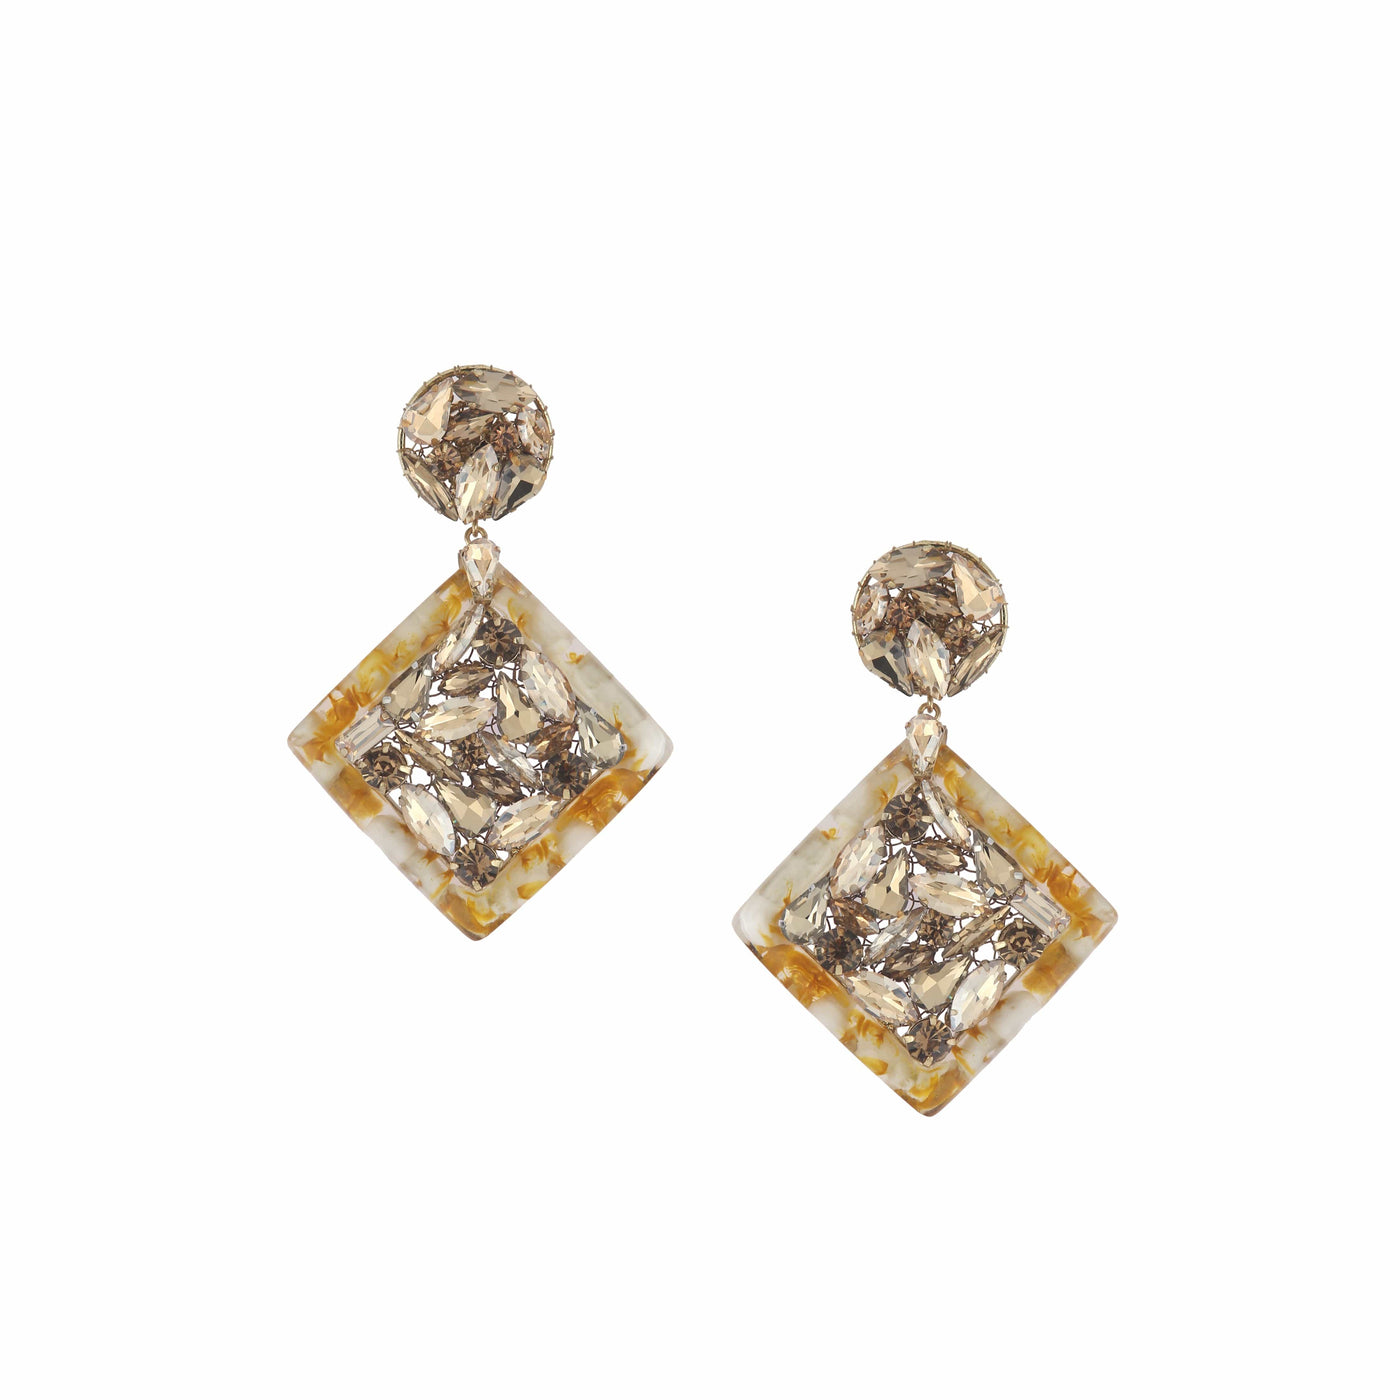 Resin Square Earrings With Crystal Stones